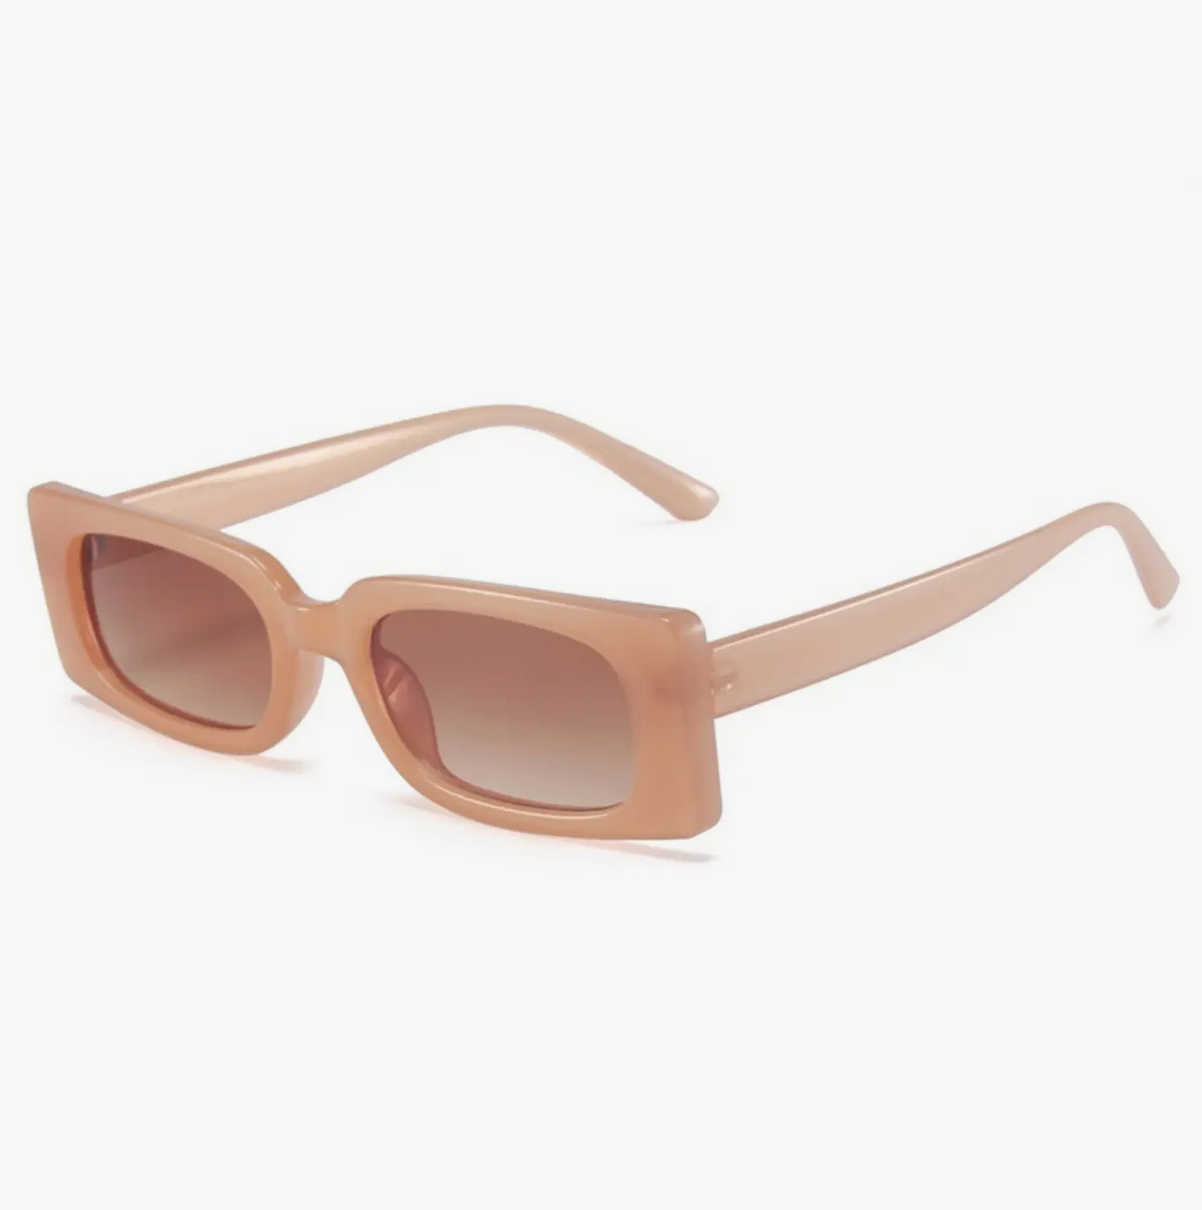 Beyond Stranger Studio Sunglasses the MARLEY in APRICOT - OS